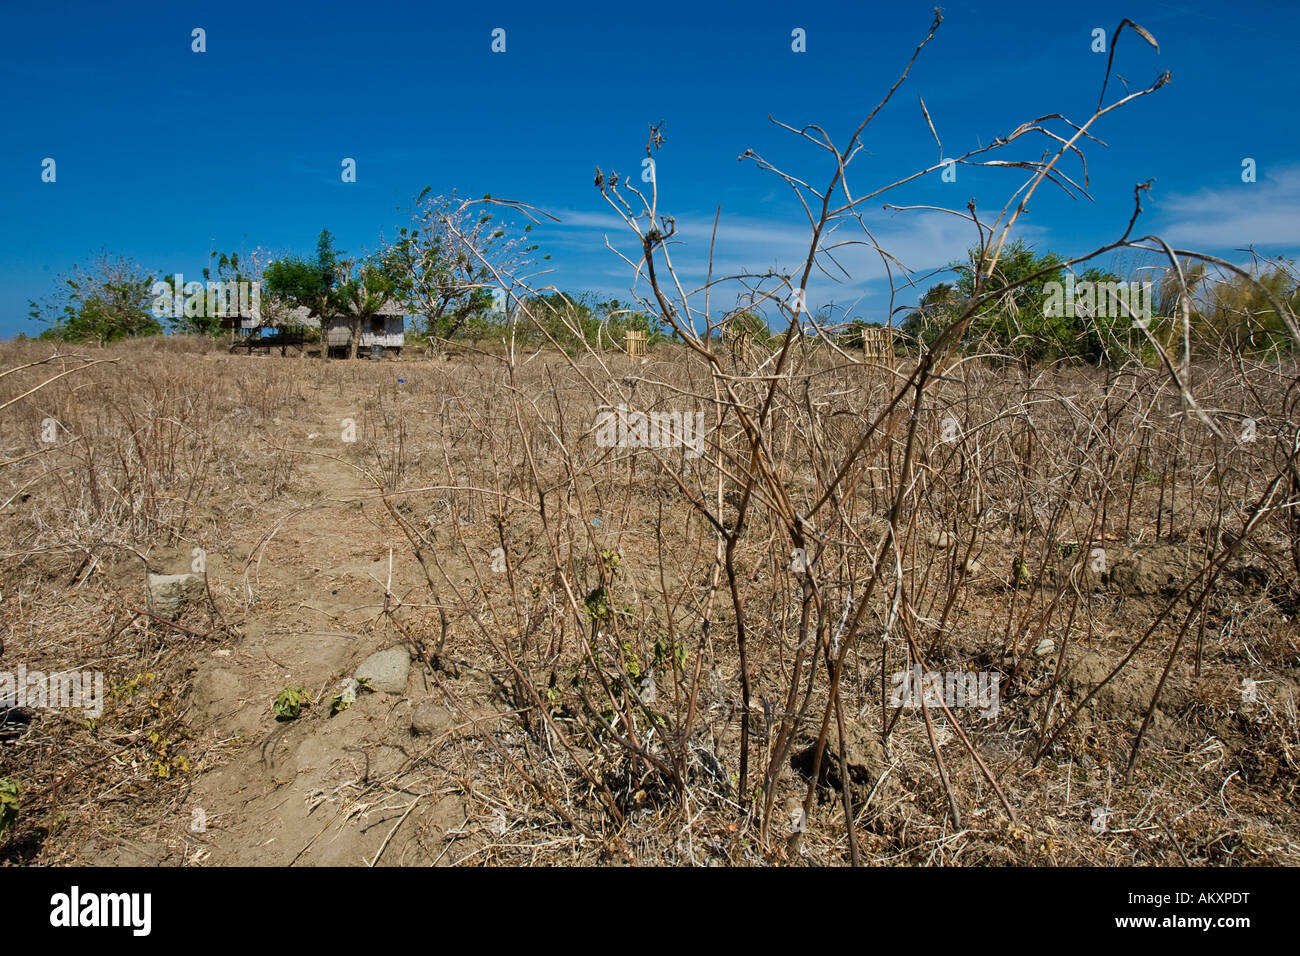 Dry arable land, Negros, the Philippines. Stock Photo